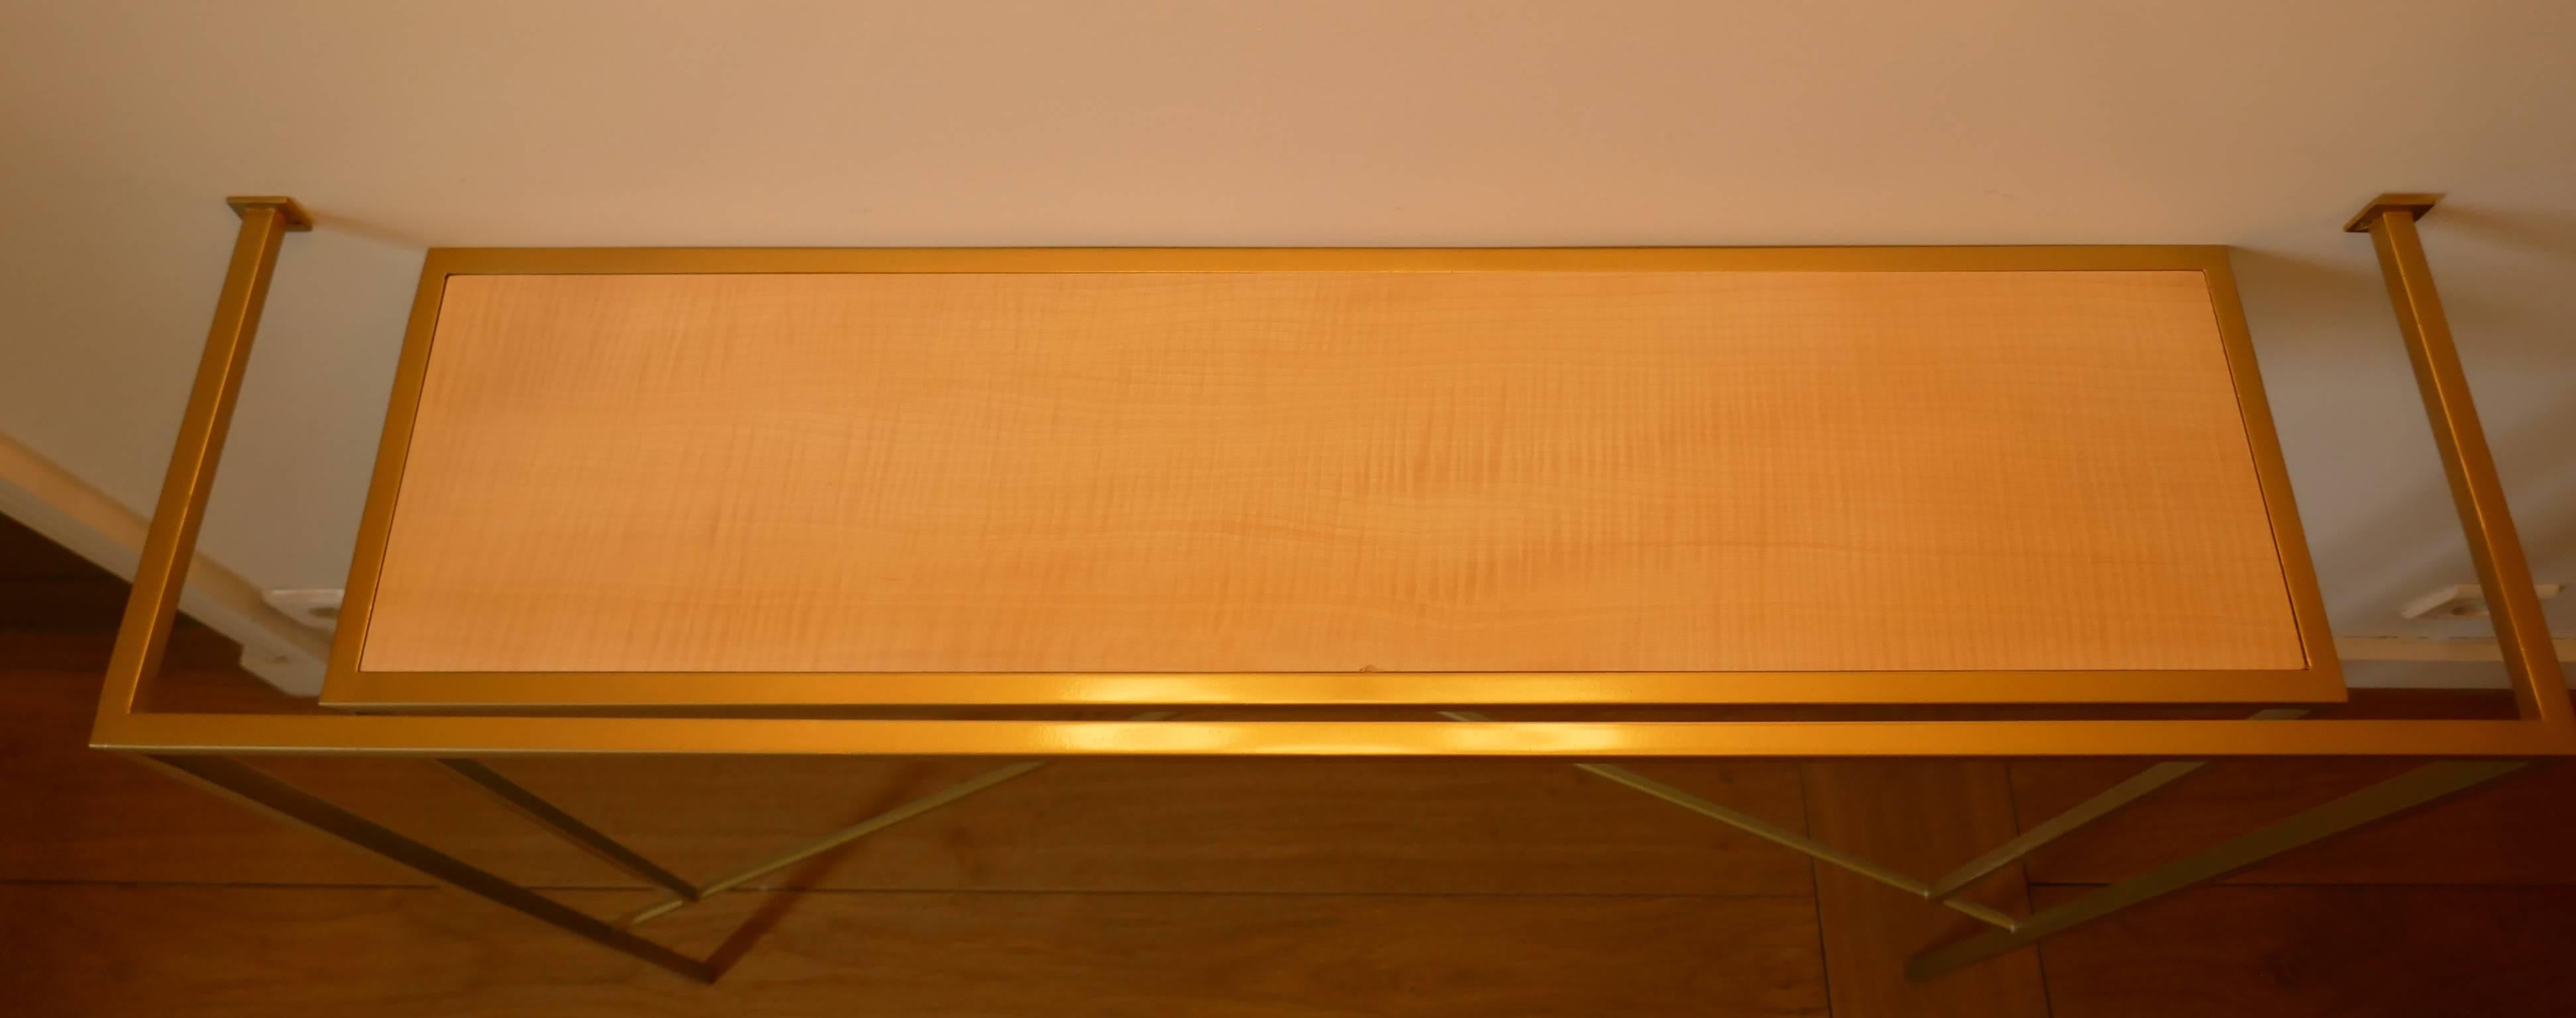 Modern Console in Gold, Bronze Brass Patina with One Sycamore Shelve by Aymeric Lefort For Sale